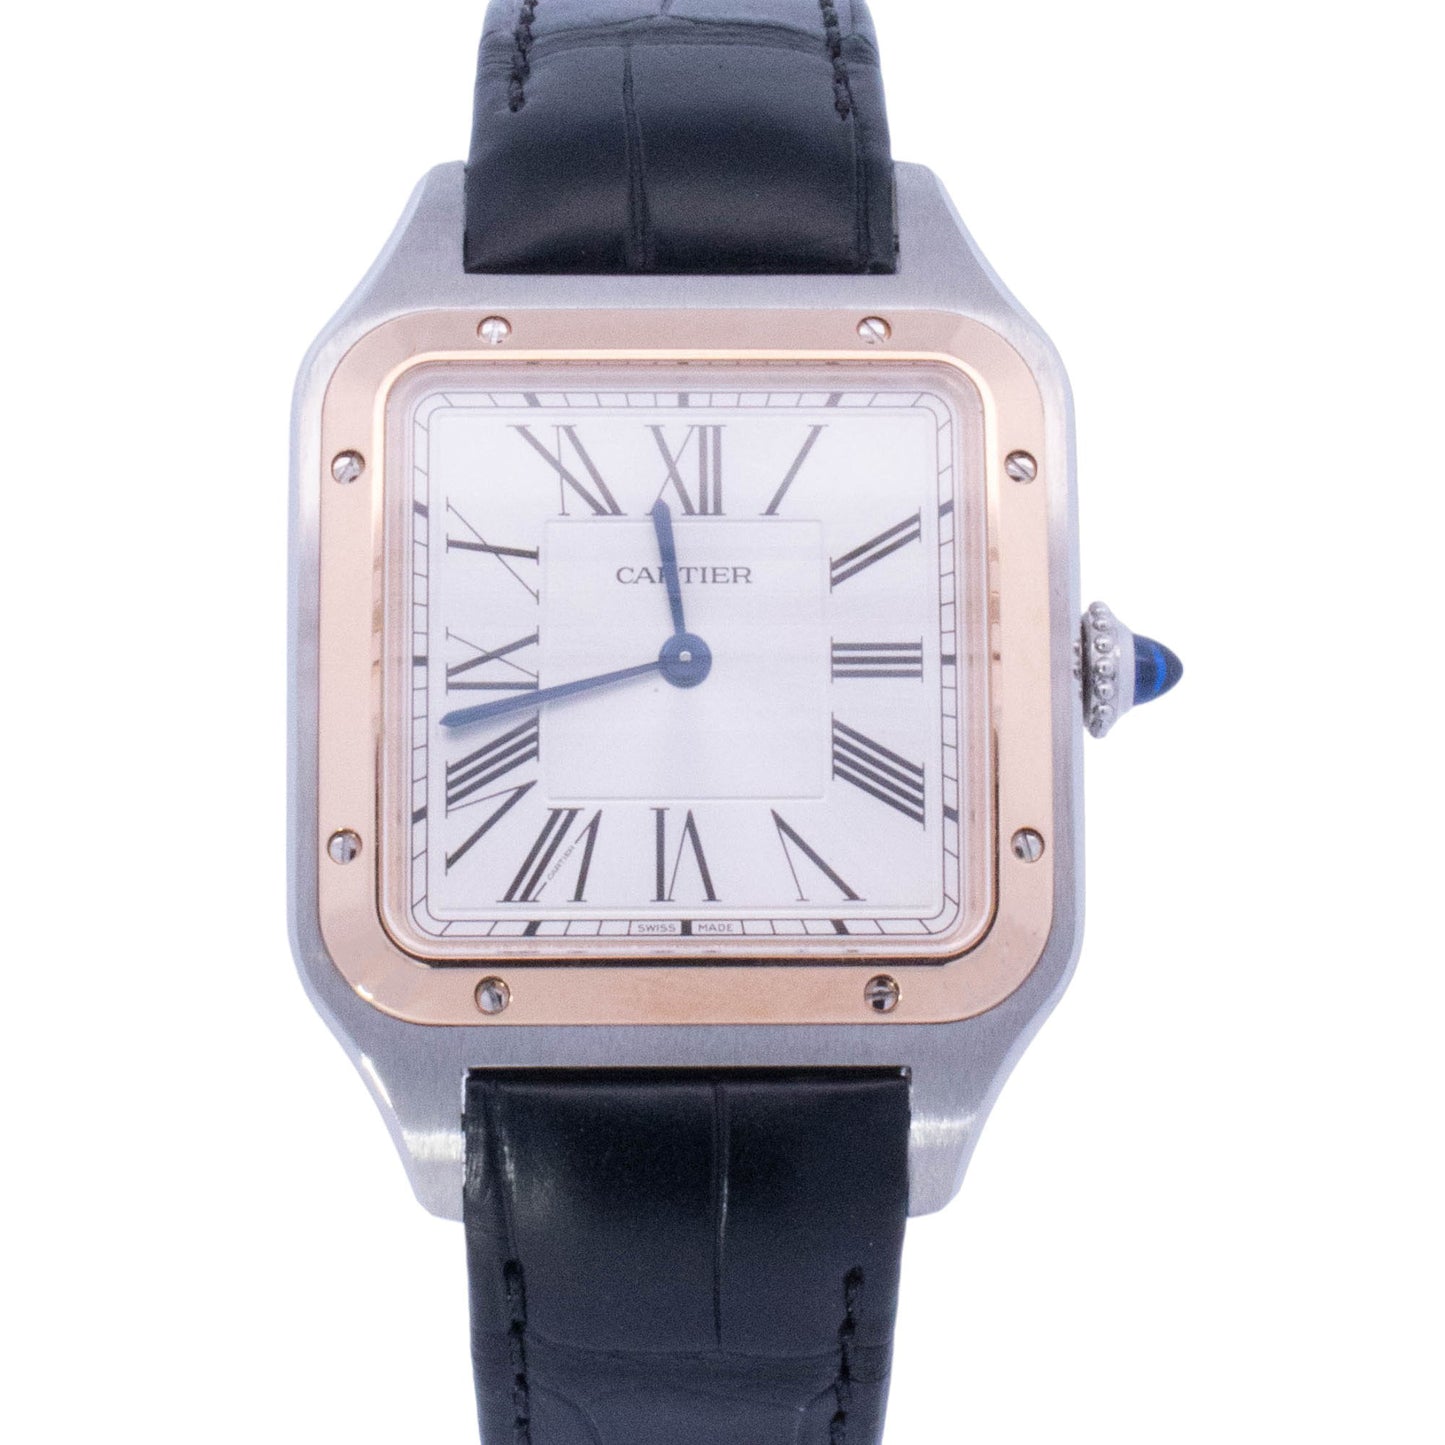 Cartier Santos Dumont 43.5 mm x 31.4 mm Rose Gold and Stainless Steel White Roman Dial Watch Reference# W2SA0011 - Happy Jewelers Fine Jewelry Lifetime Warranty